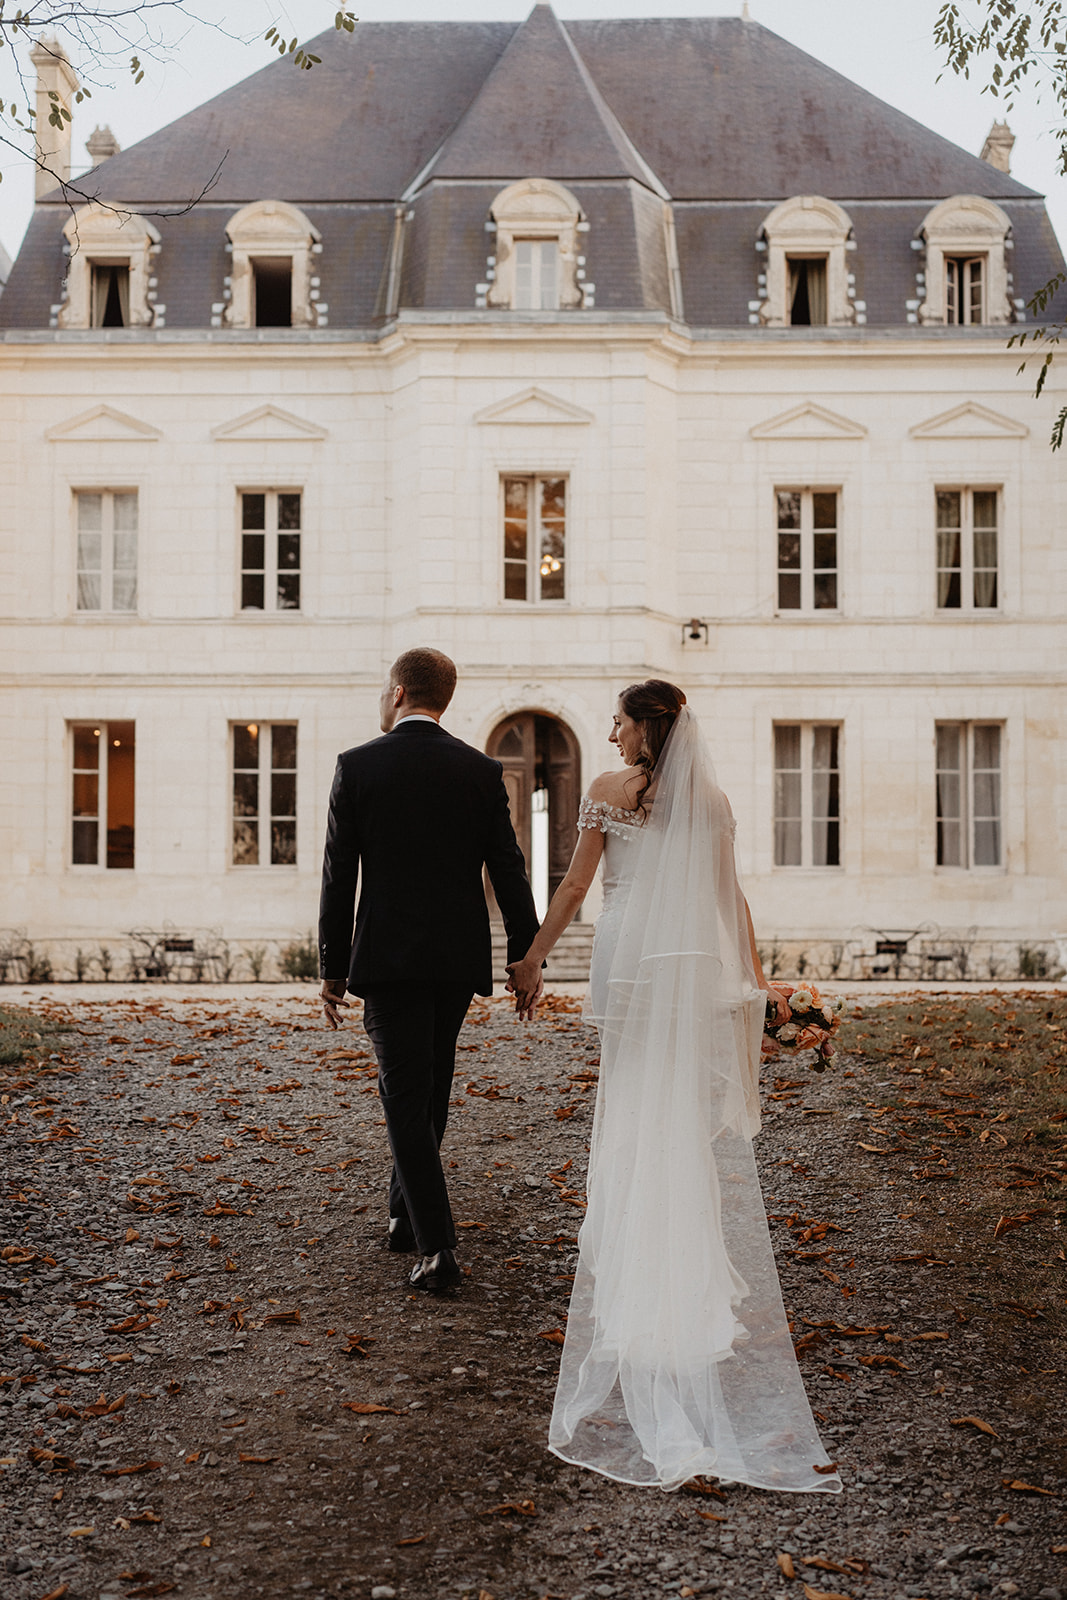 A couple who gets married in South West France, at the chateau Fengari